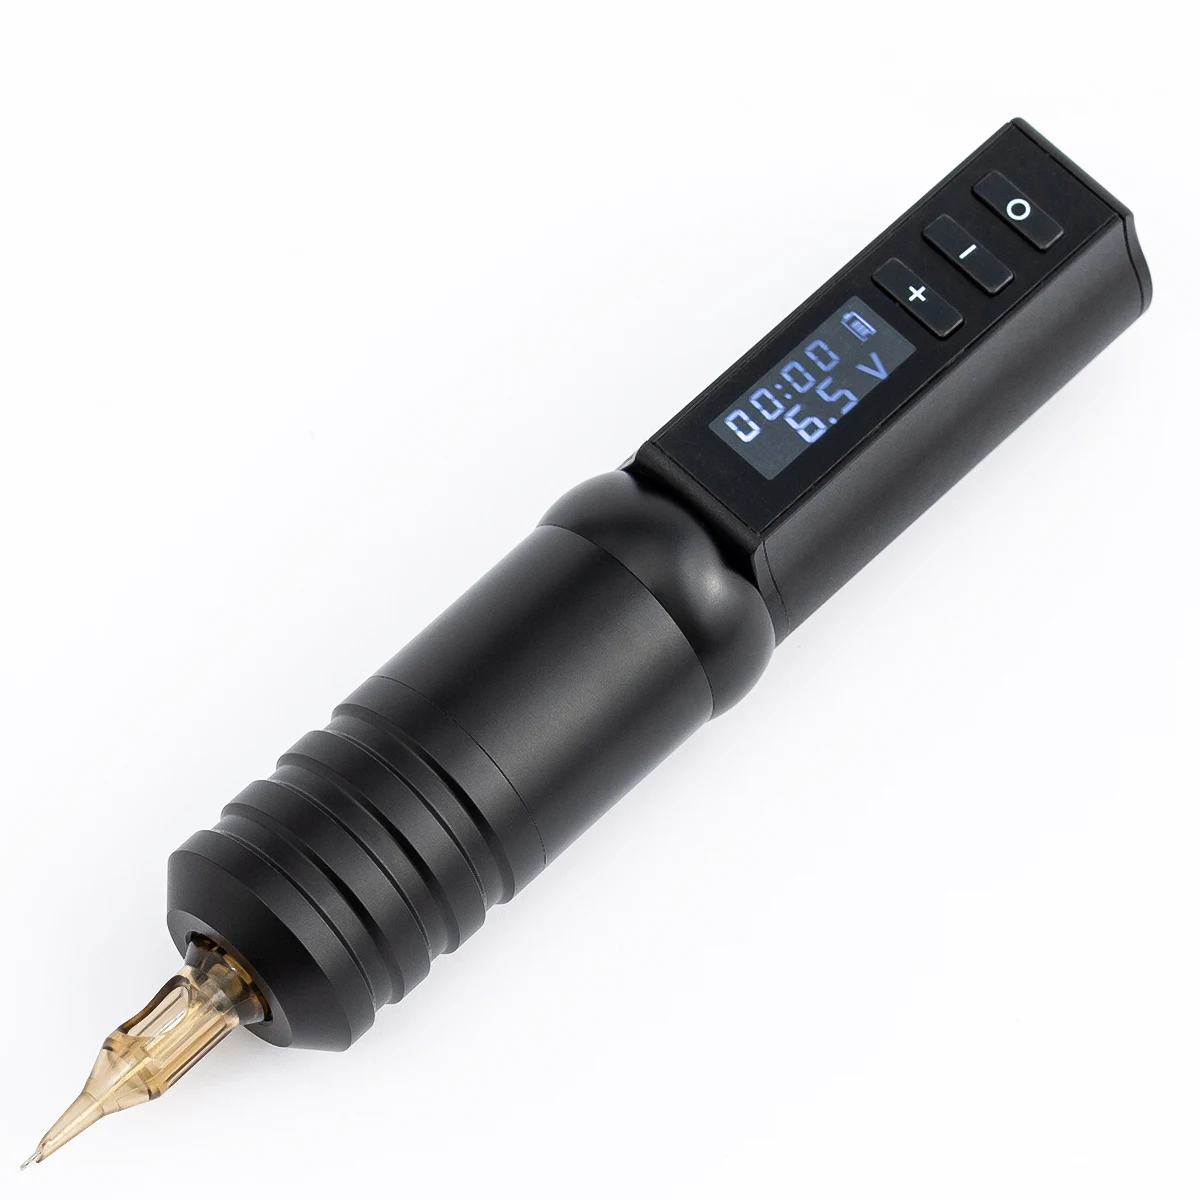 

Ambition High Quality Japan Motor Wireless Rotary Tattoo Pen Professional Tattoo Machine for Beginner and Artist, Black